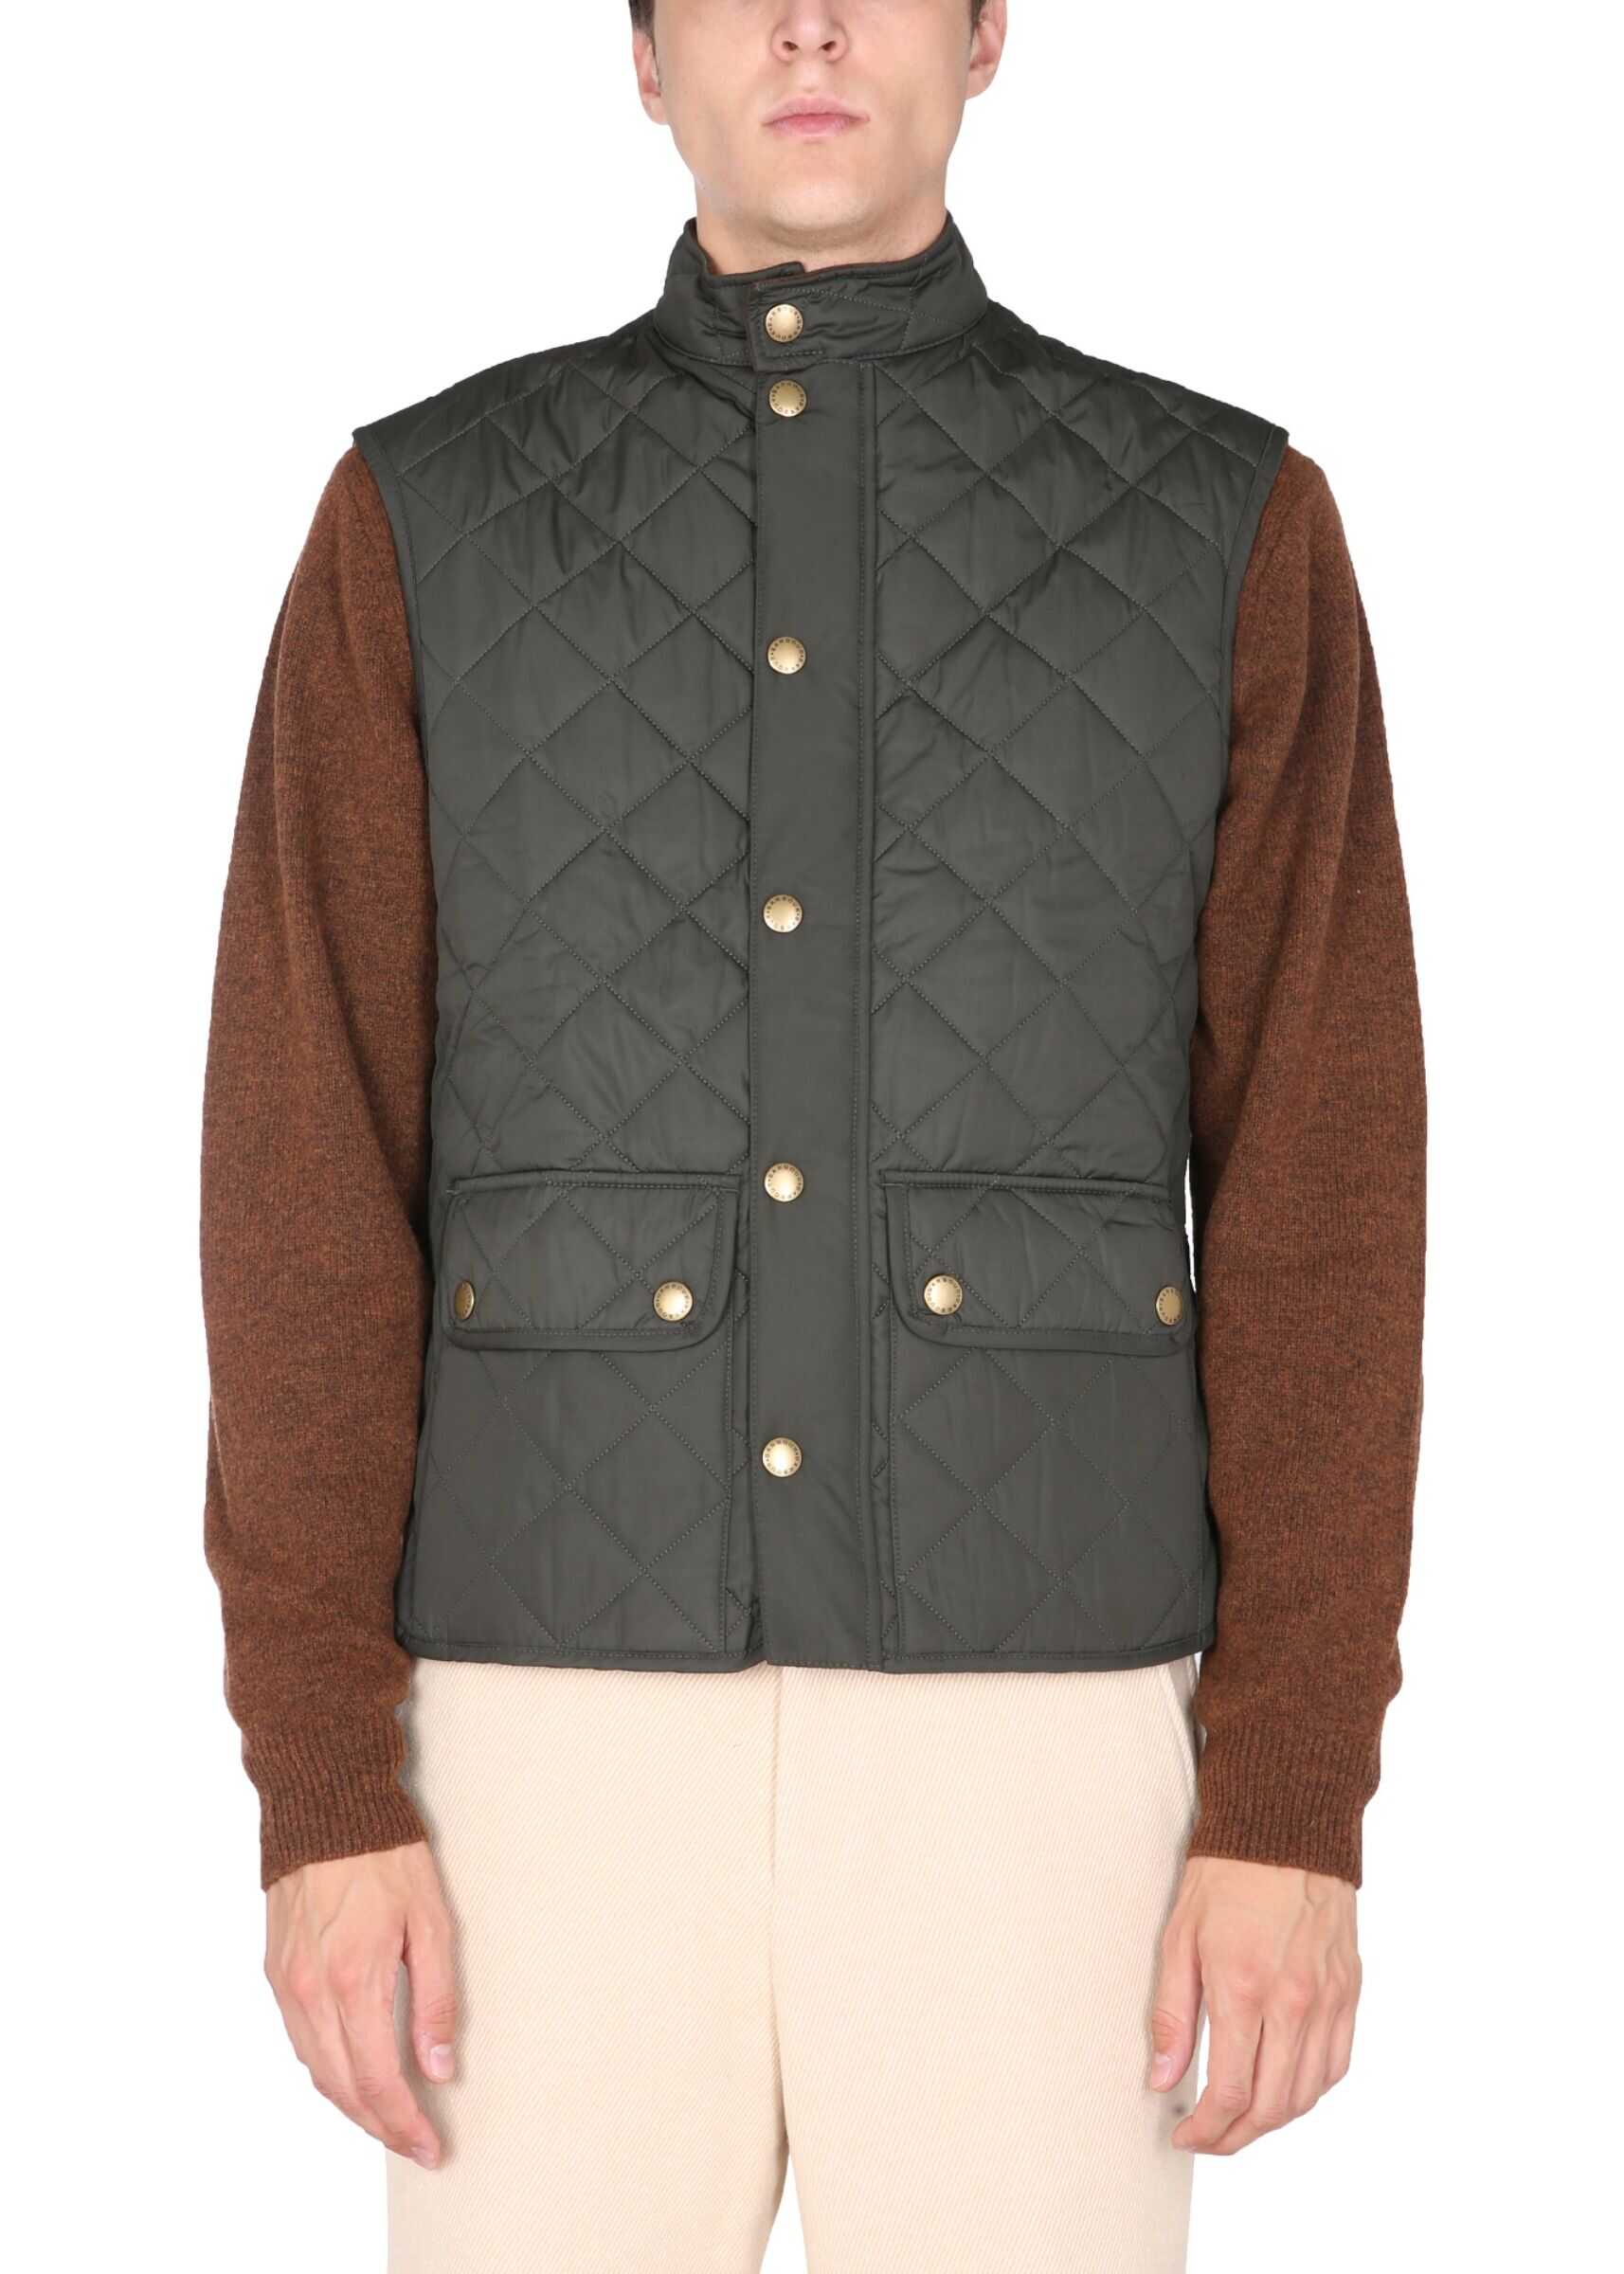 Barbour "Lowerdale" Vest MGI0042_GN71 GREEN